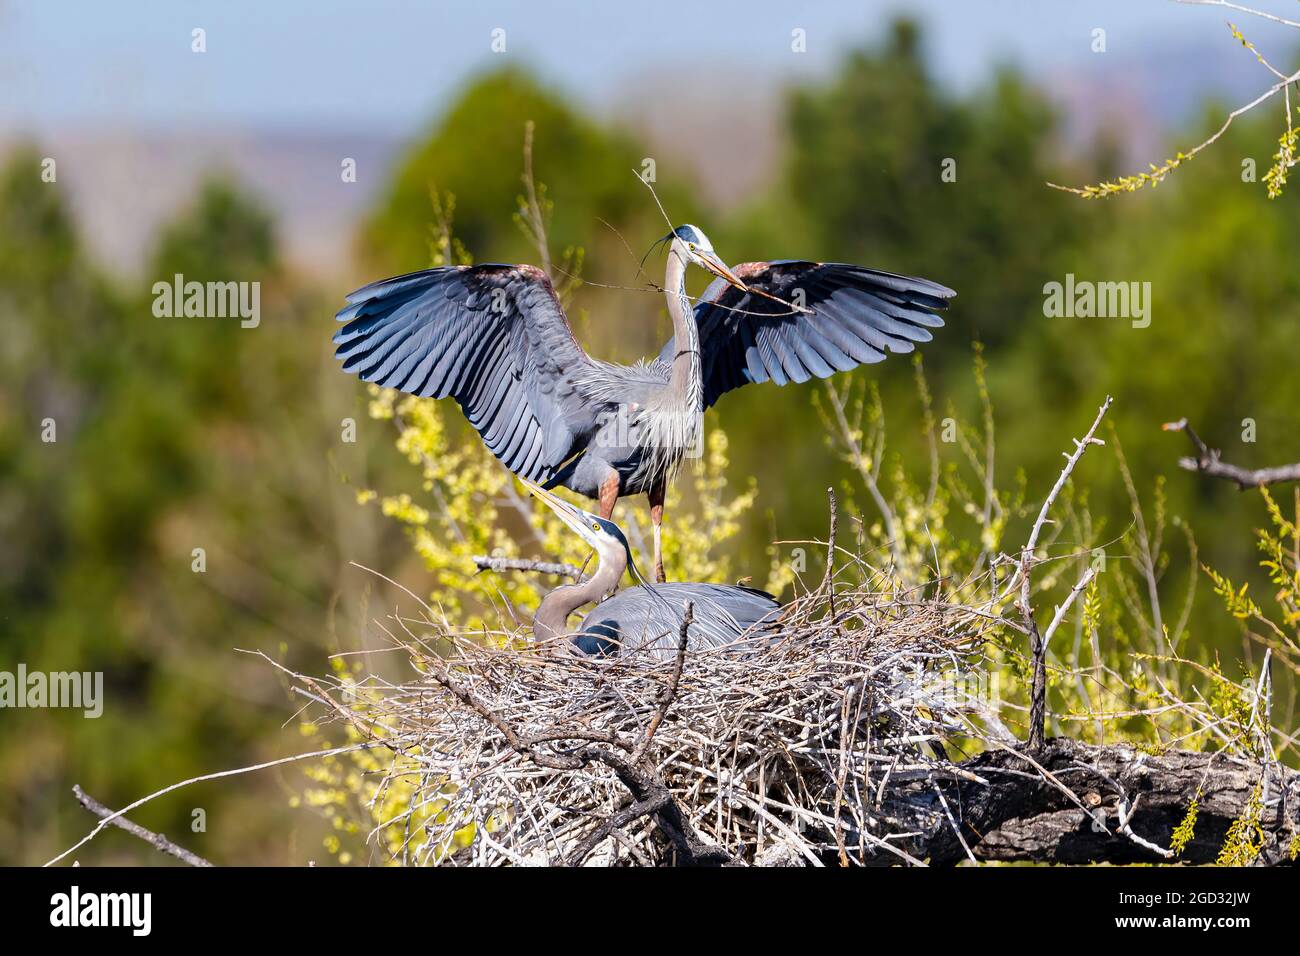 A Great Blue Heron arrives at its scenic nest site carrying a nesting stick and lands behind its partner who is nestled in the nest. Stock Photo